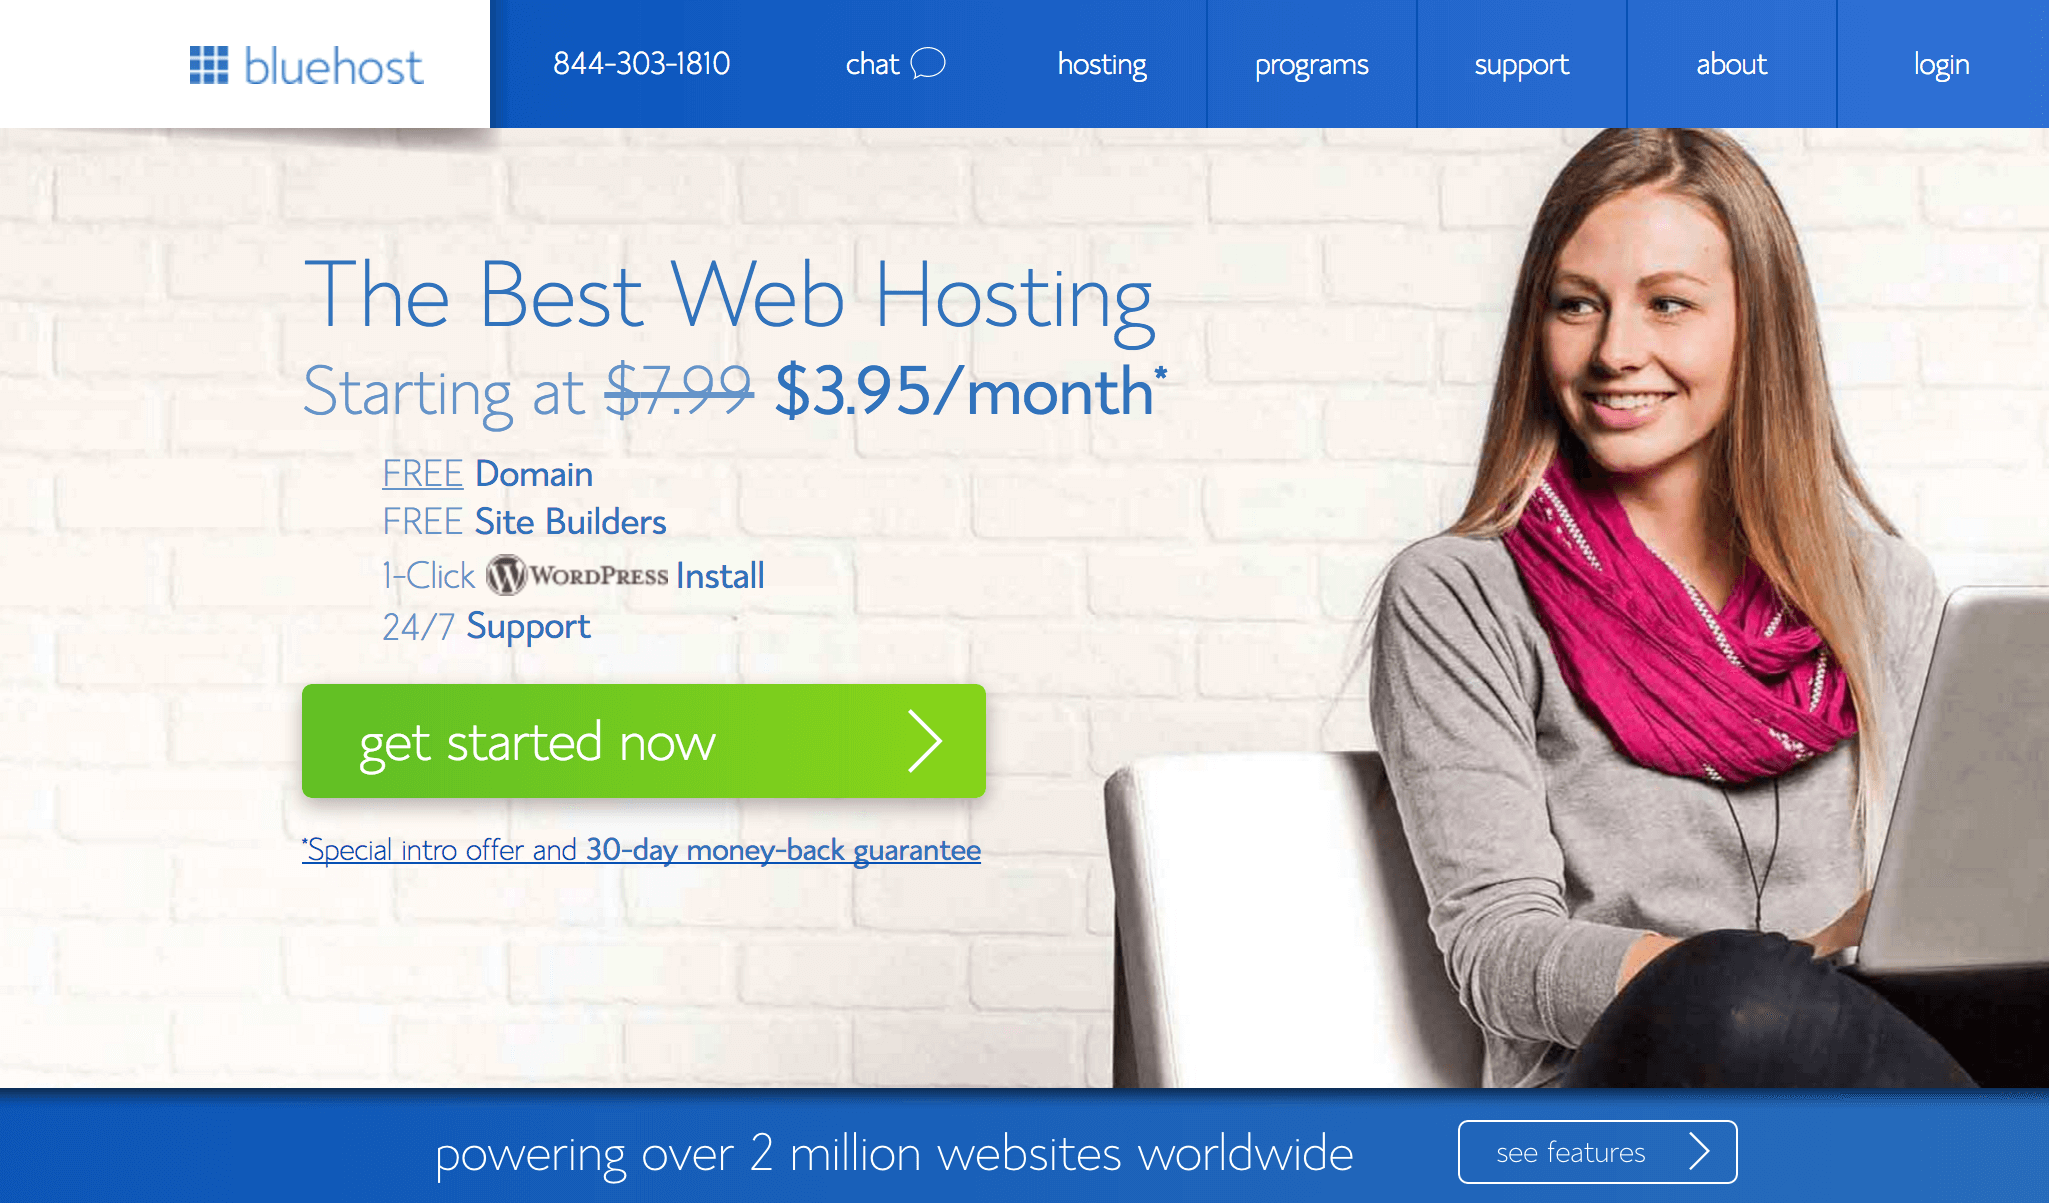 The Bluehost home page.